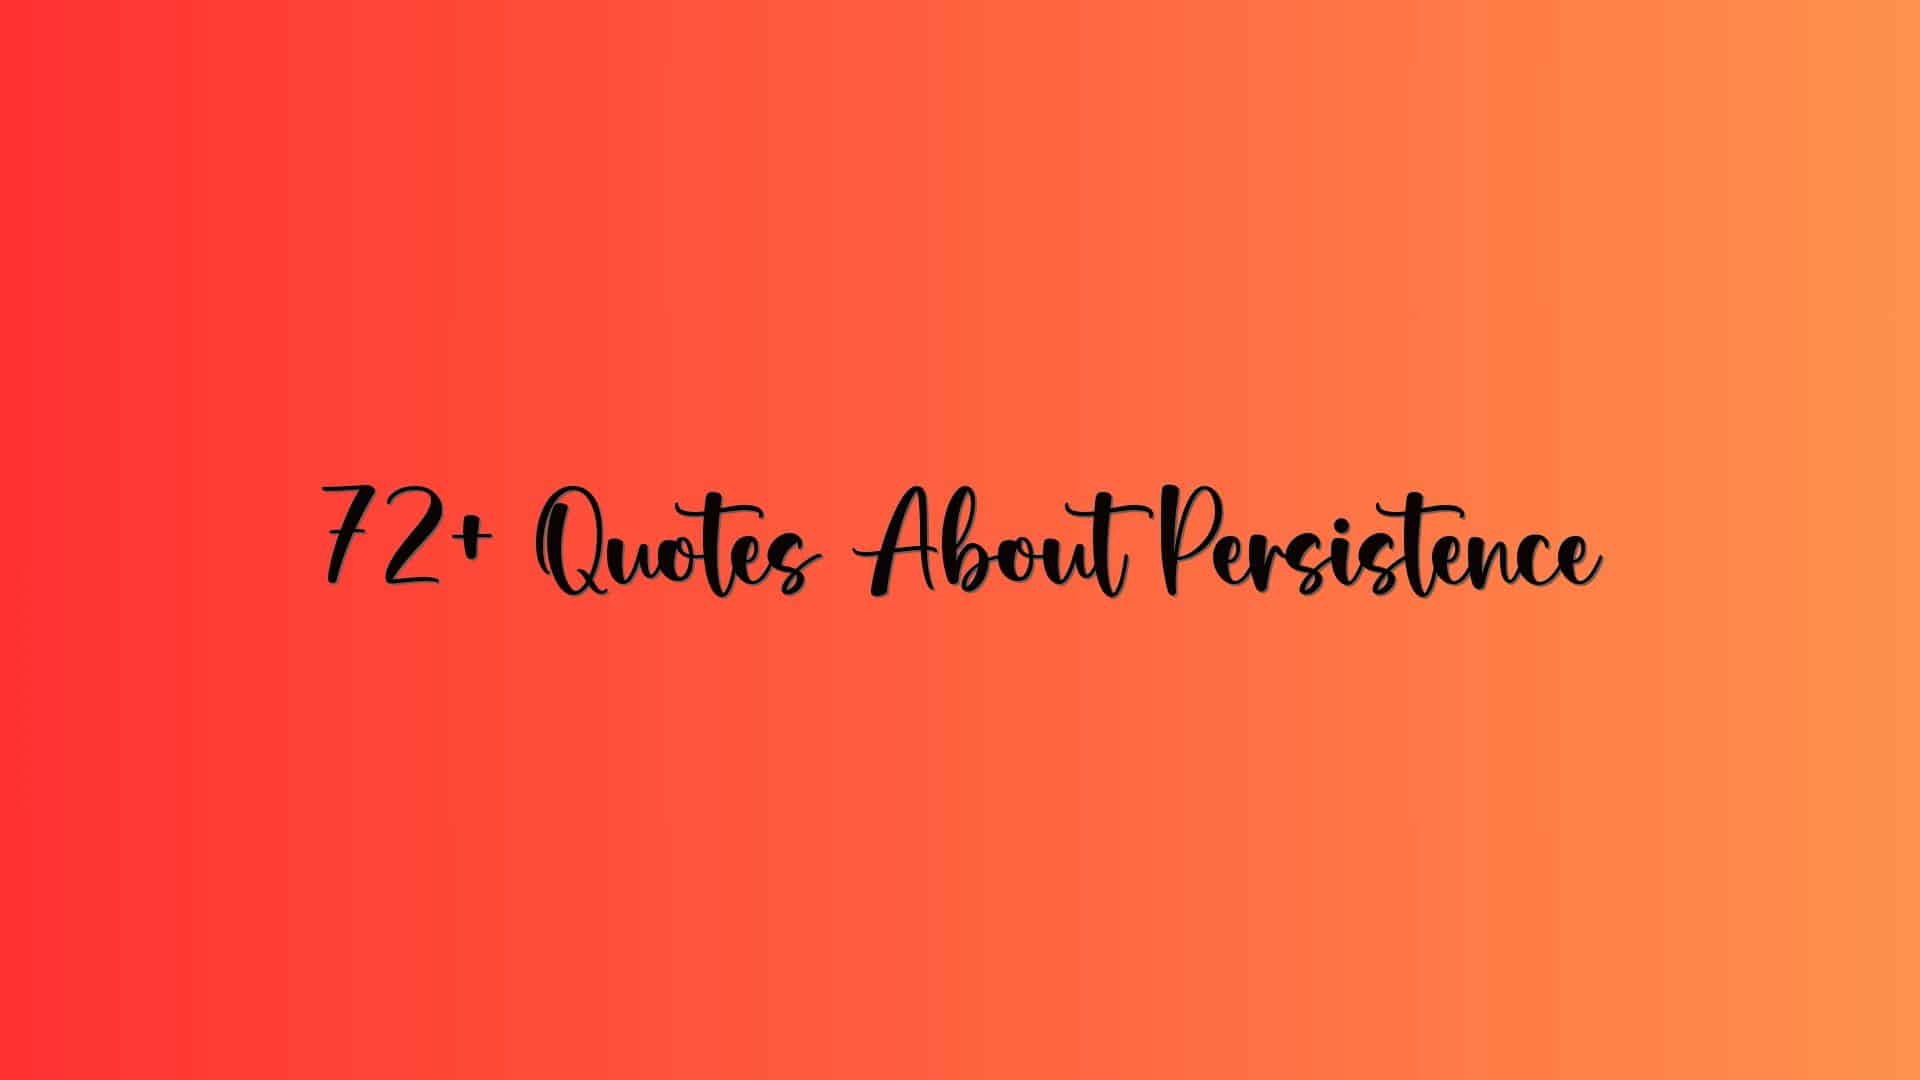 72+ Quotes About Persistence